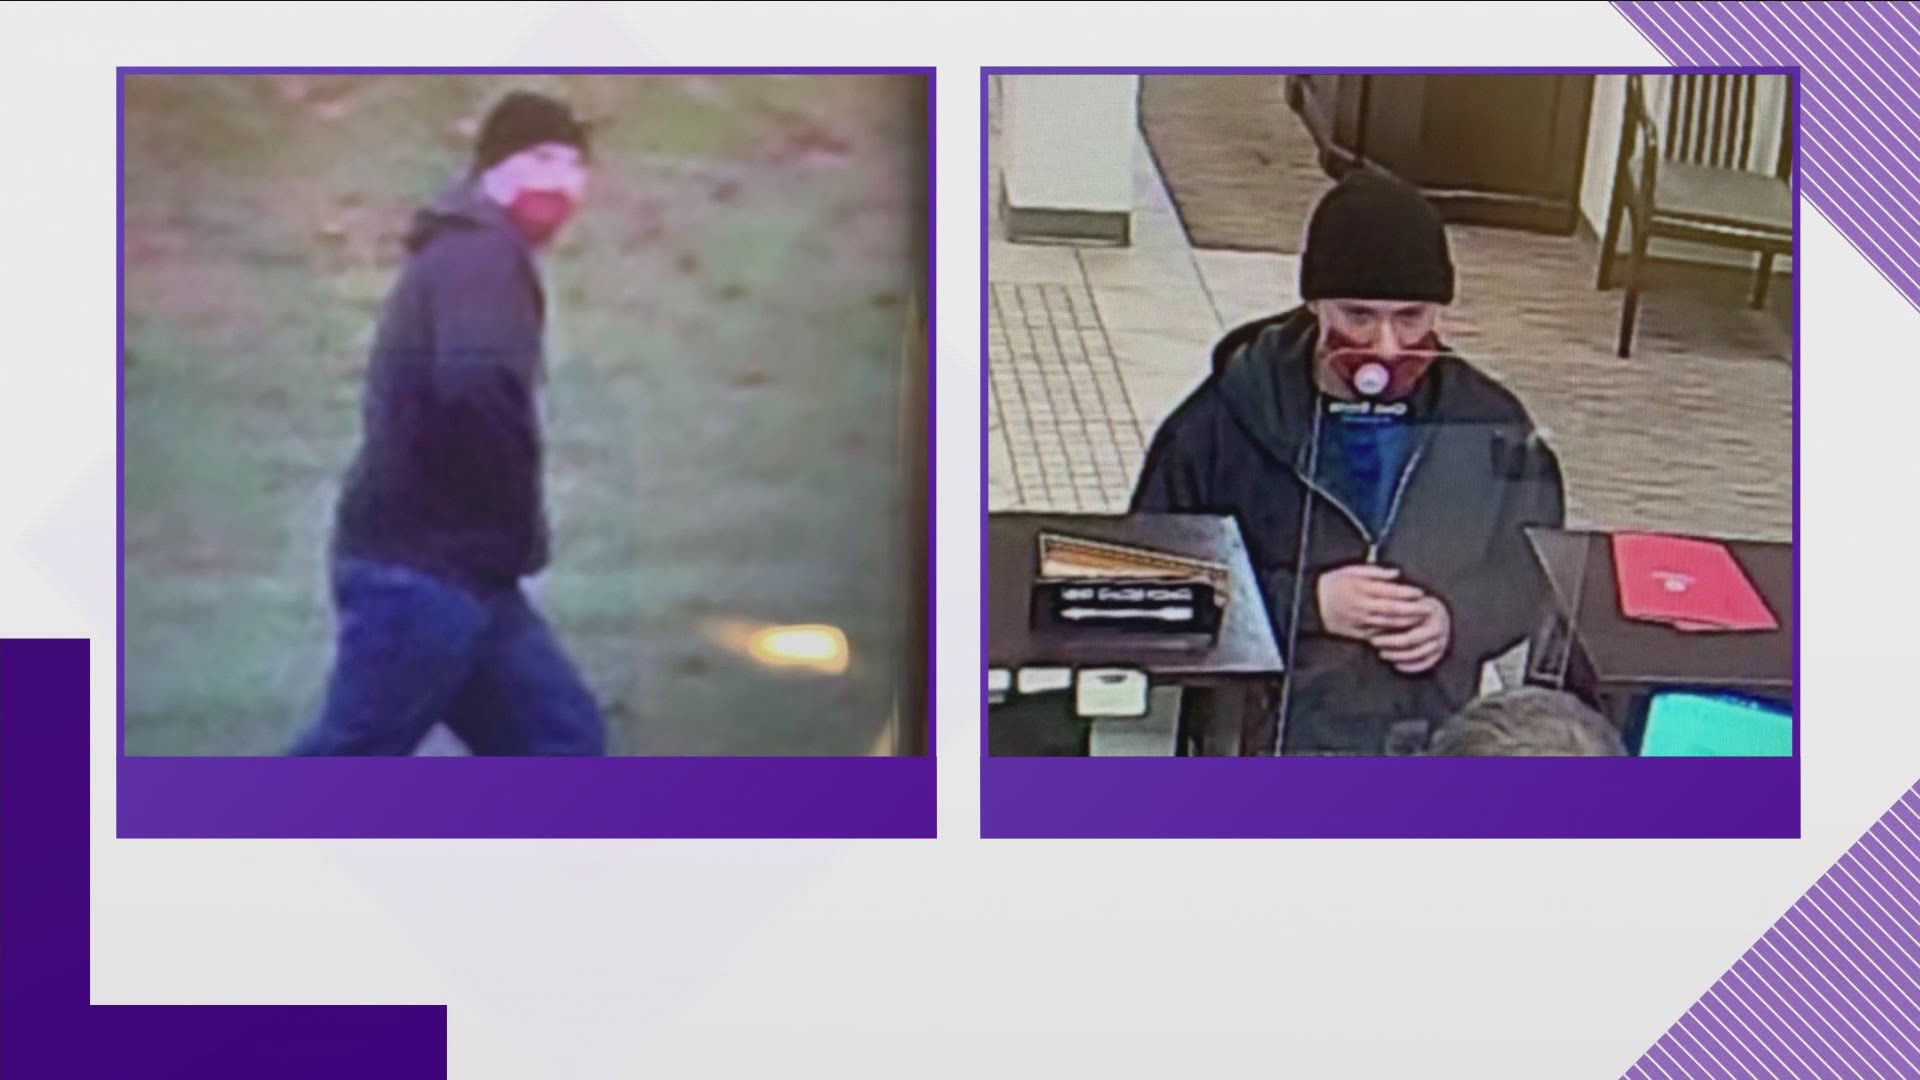 Police say the man robbed One Bank on the Oak Ridge Turnpike at about 8:35 Friday morning.